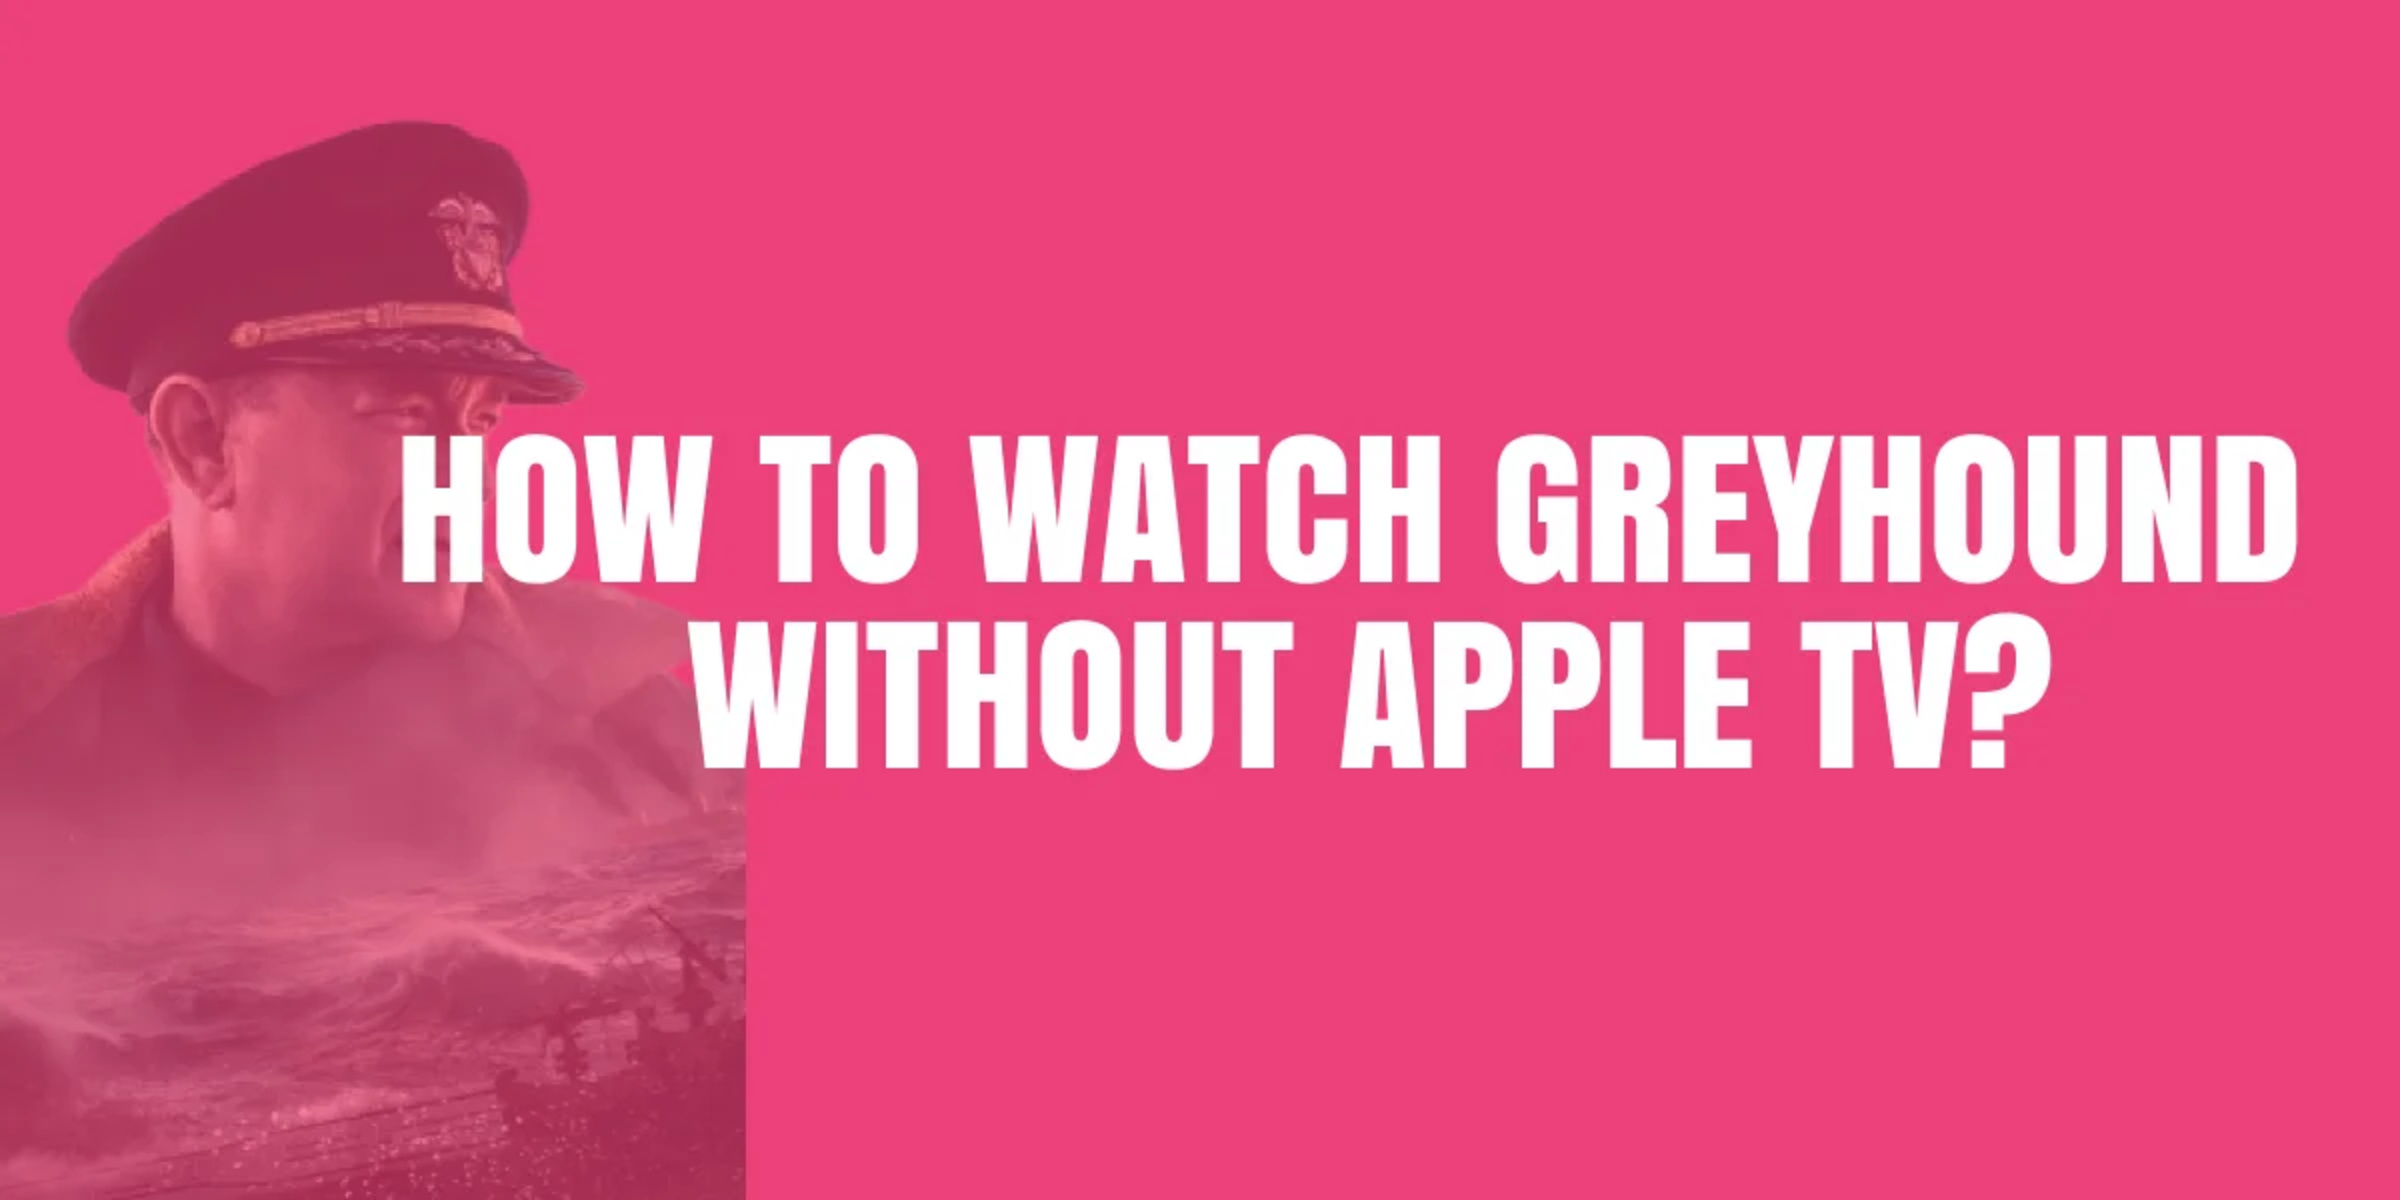 how to watch the movie greyhound without apple tv